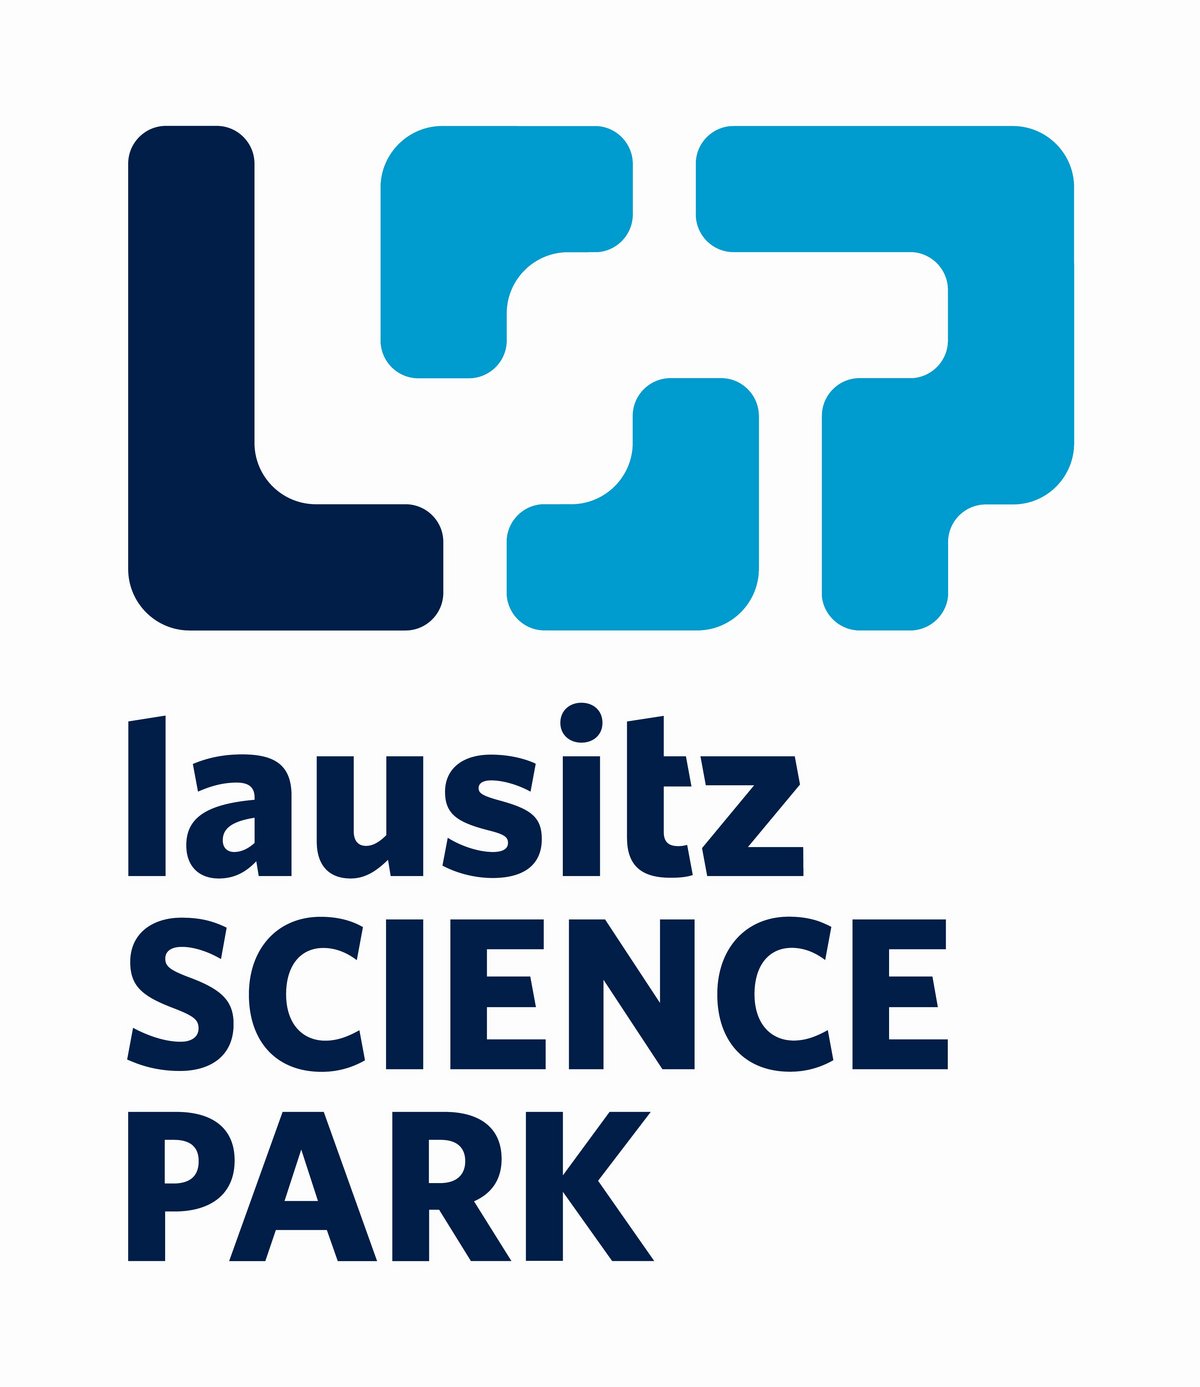 [Translate to Englisch:] Logo Lausitz Science Park